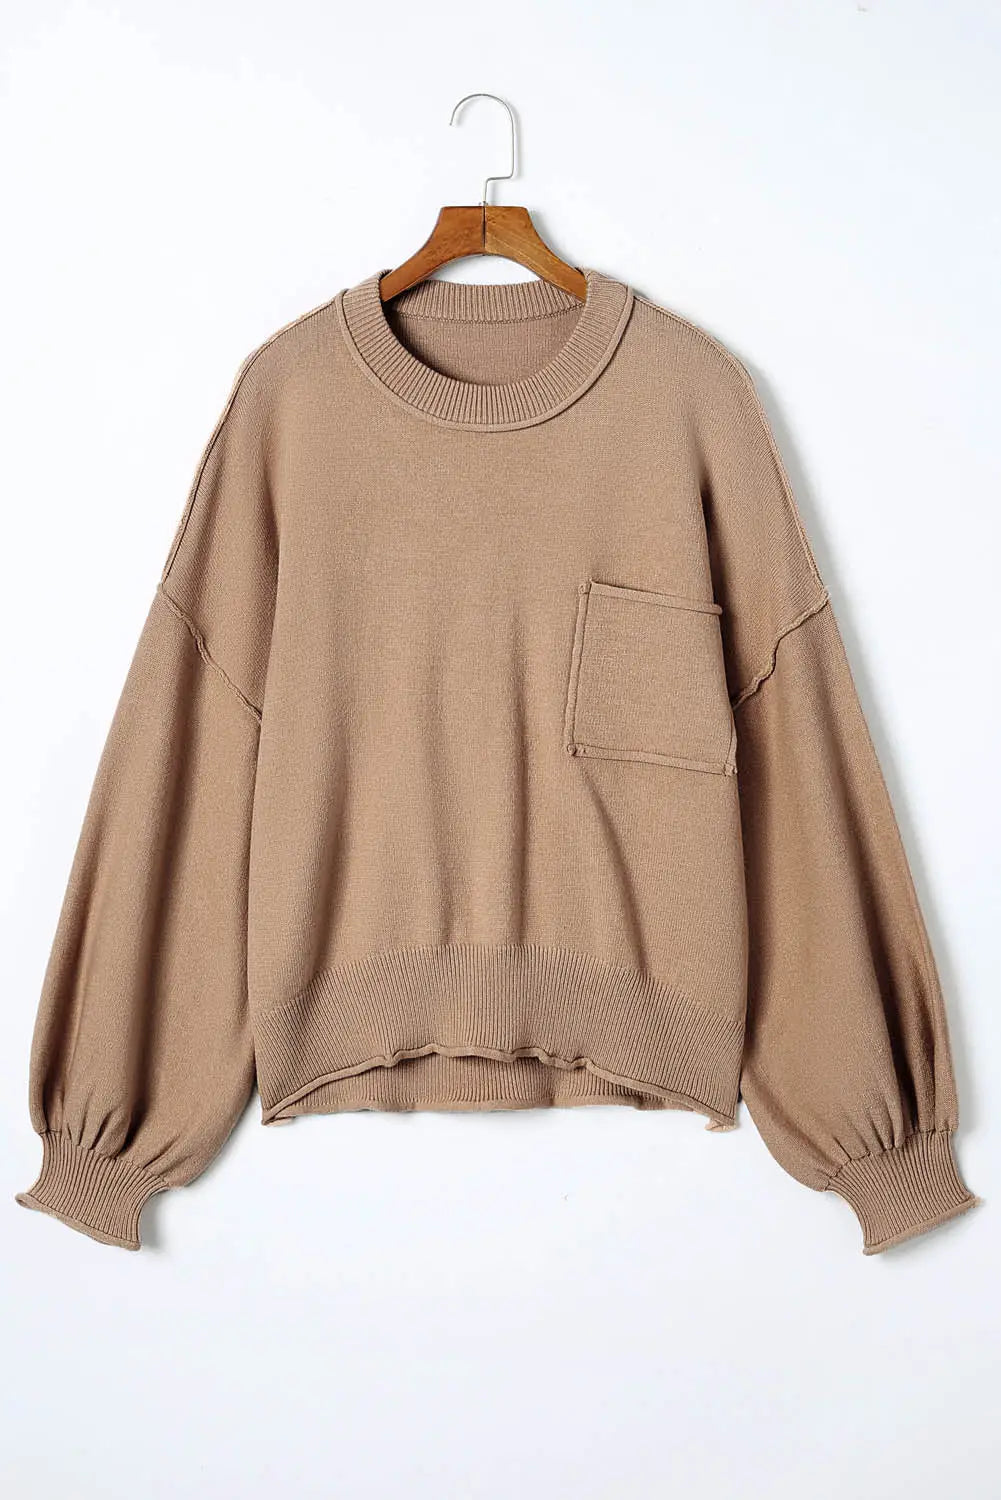 Apricot Raw Edge Patch Pocket Exposed Seam Loose Sweater-7